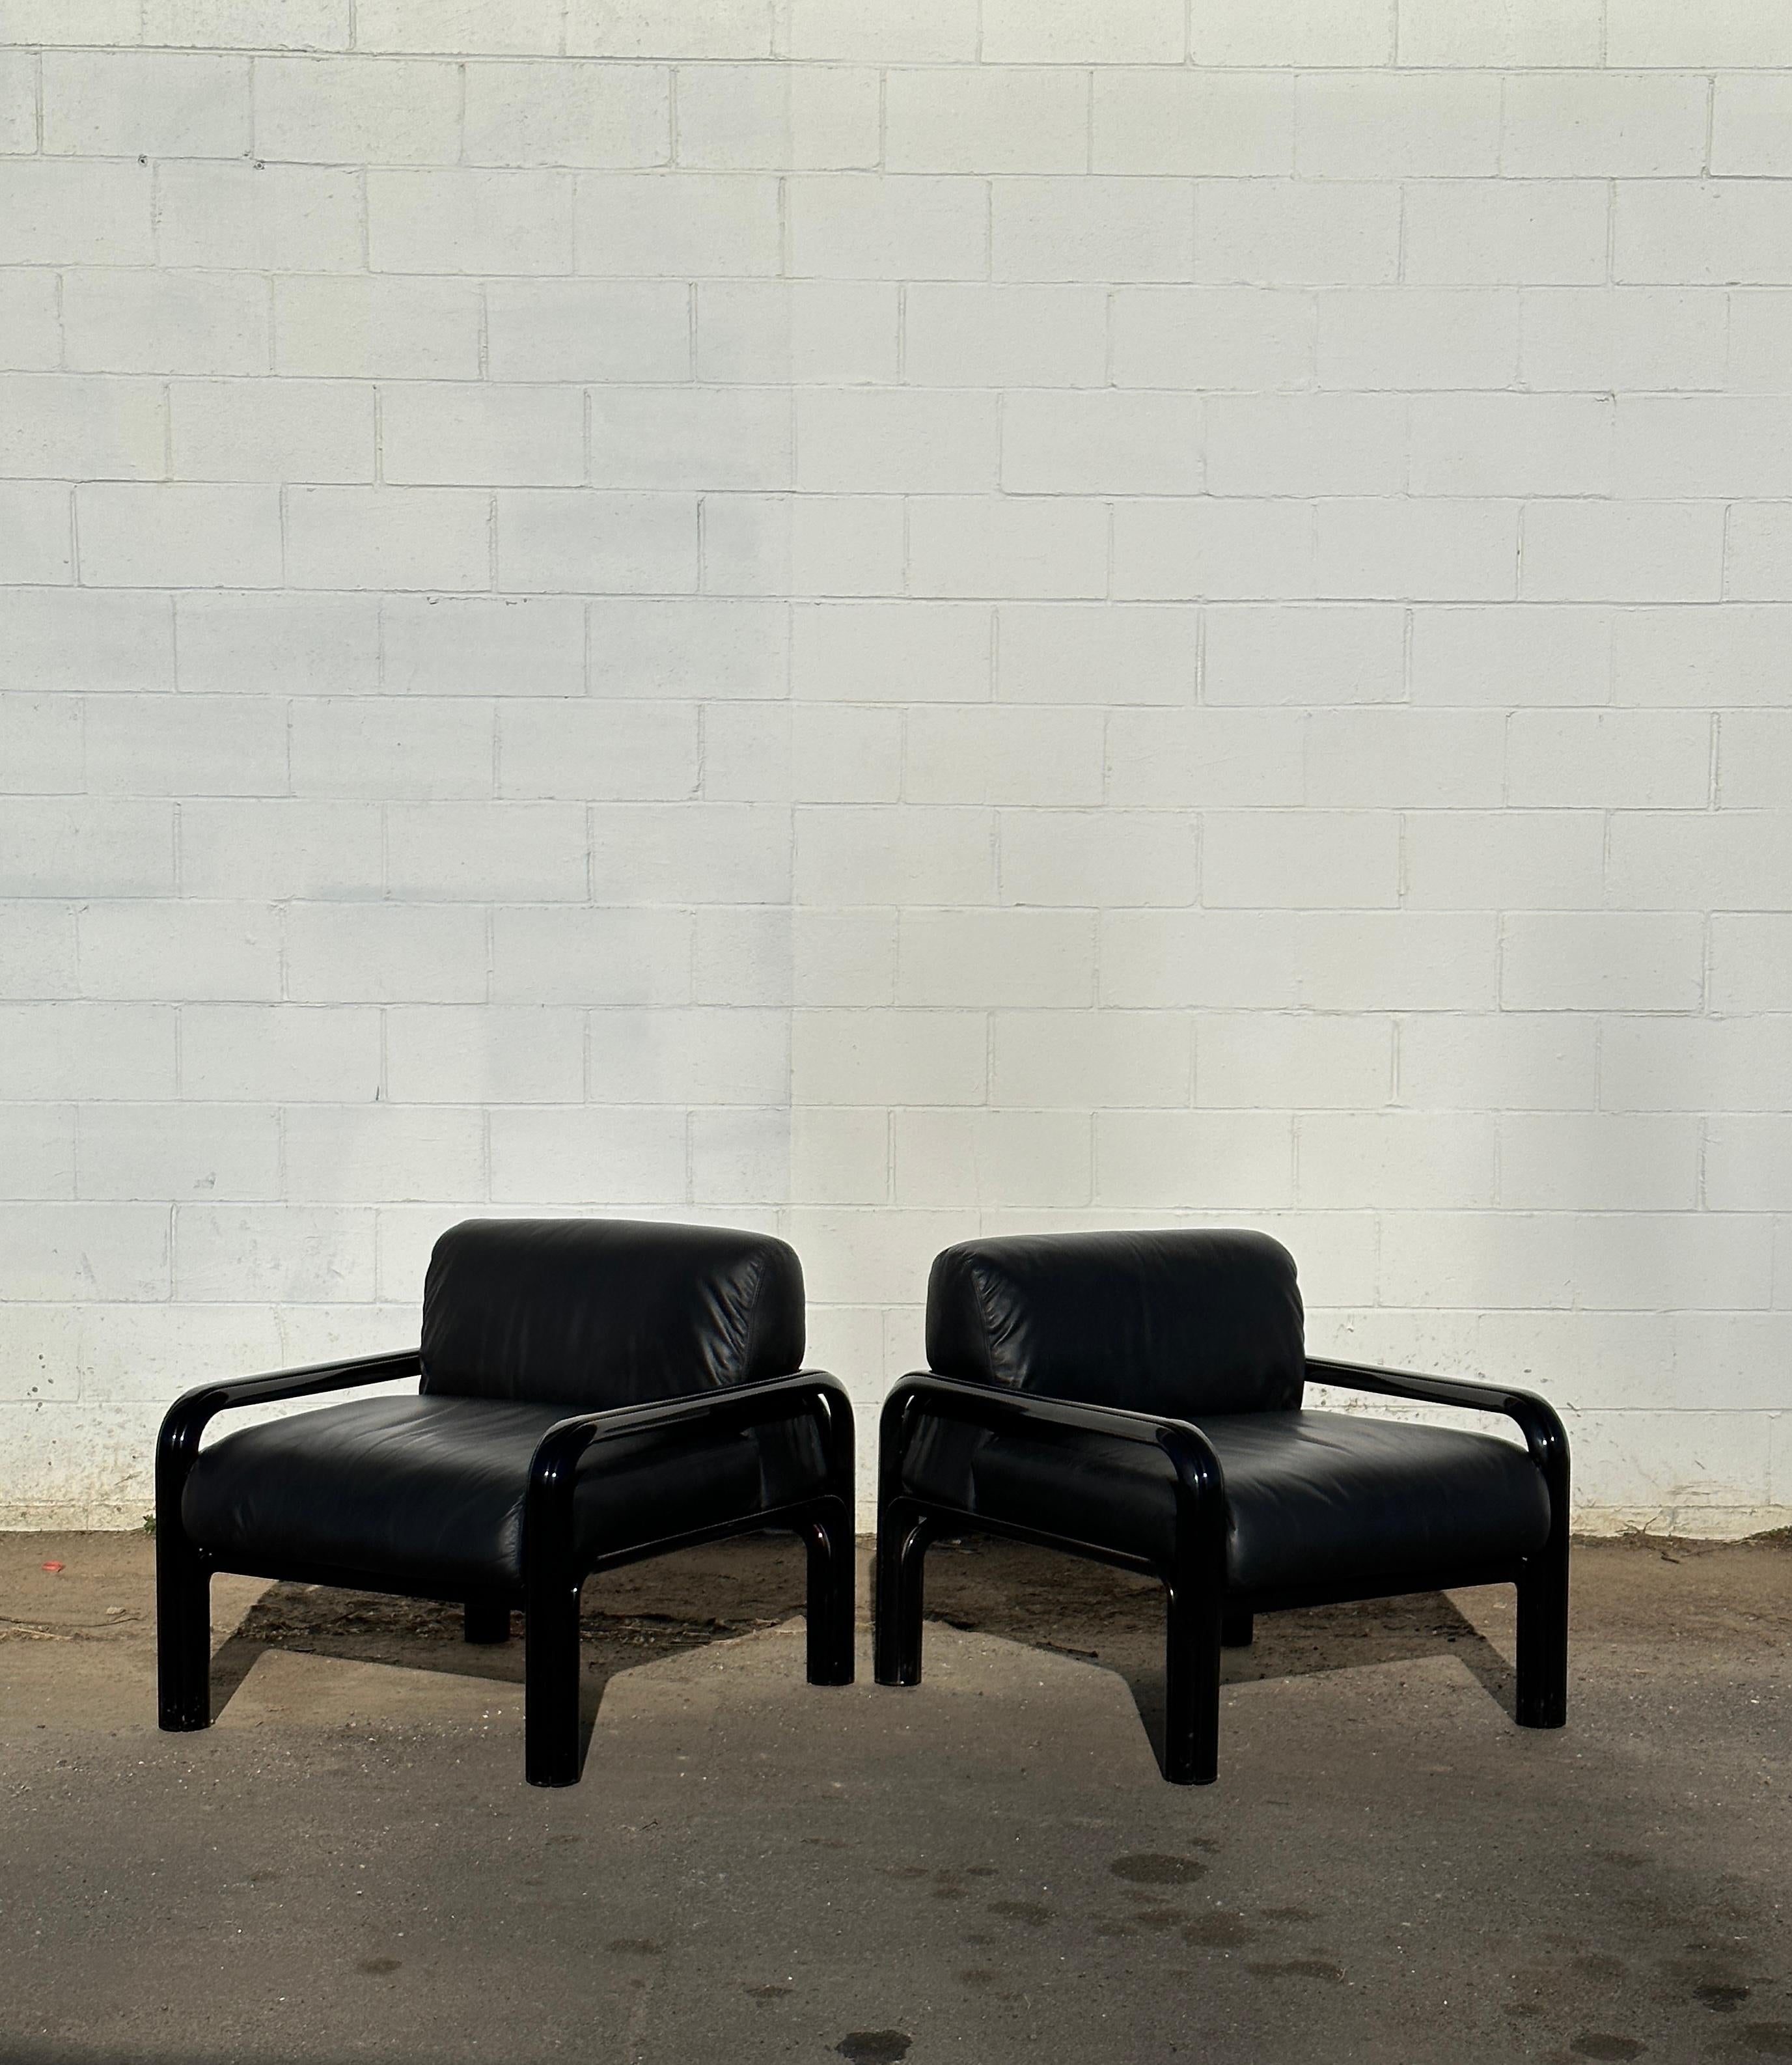 Vintage lounge chairs designed by Gae Aulenti for Knoll. Original upholstery in black leather with lacquered black frames. Made in Italy, circa 1970s.

Sturdy set, excellent vintage condition showing minor wear and tear such as scratches and nicks